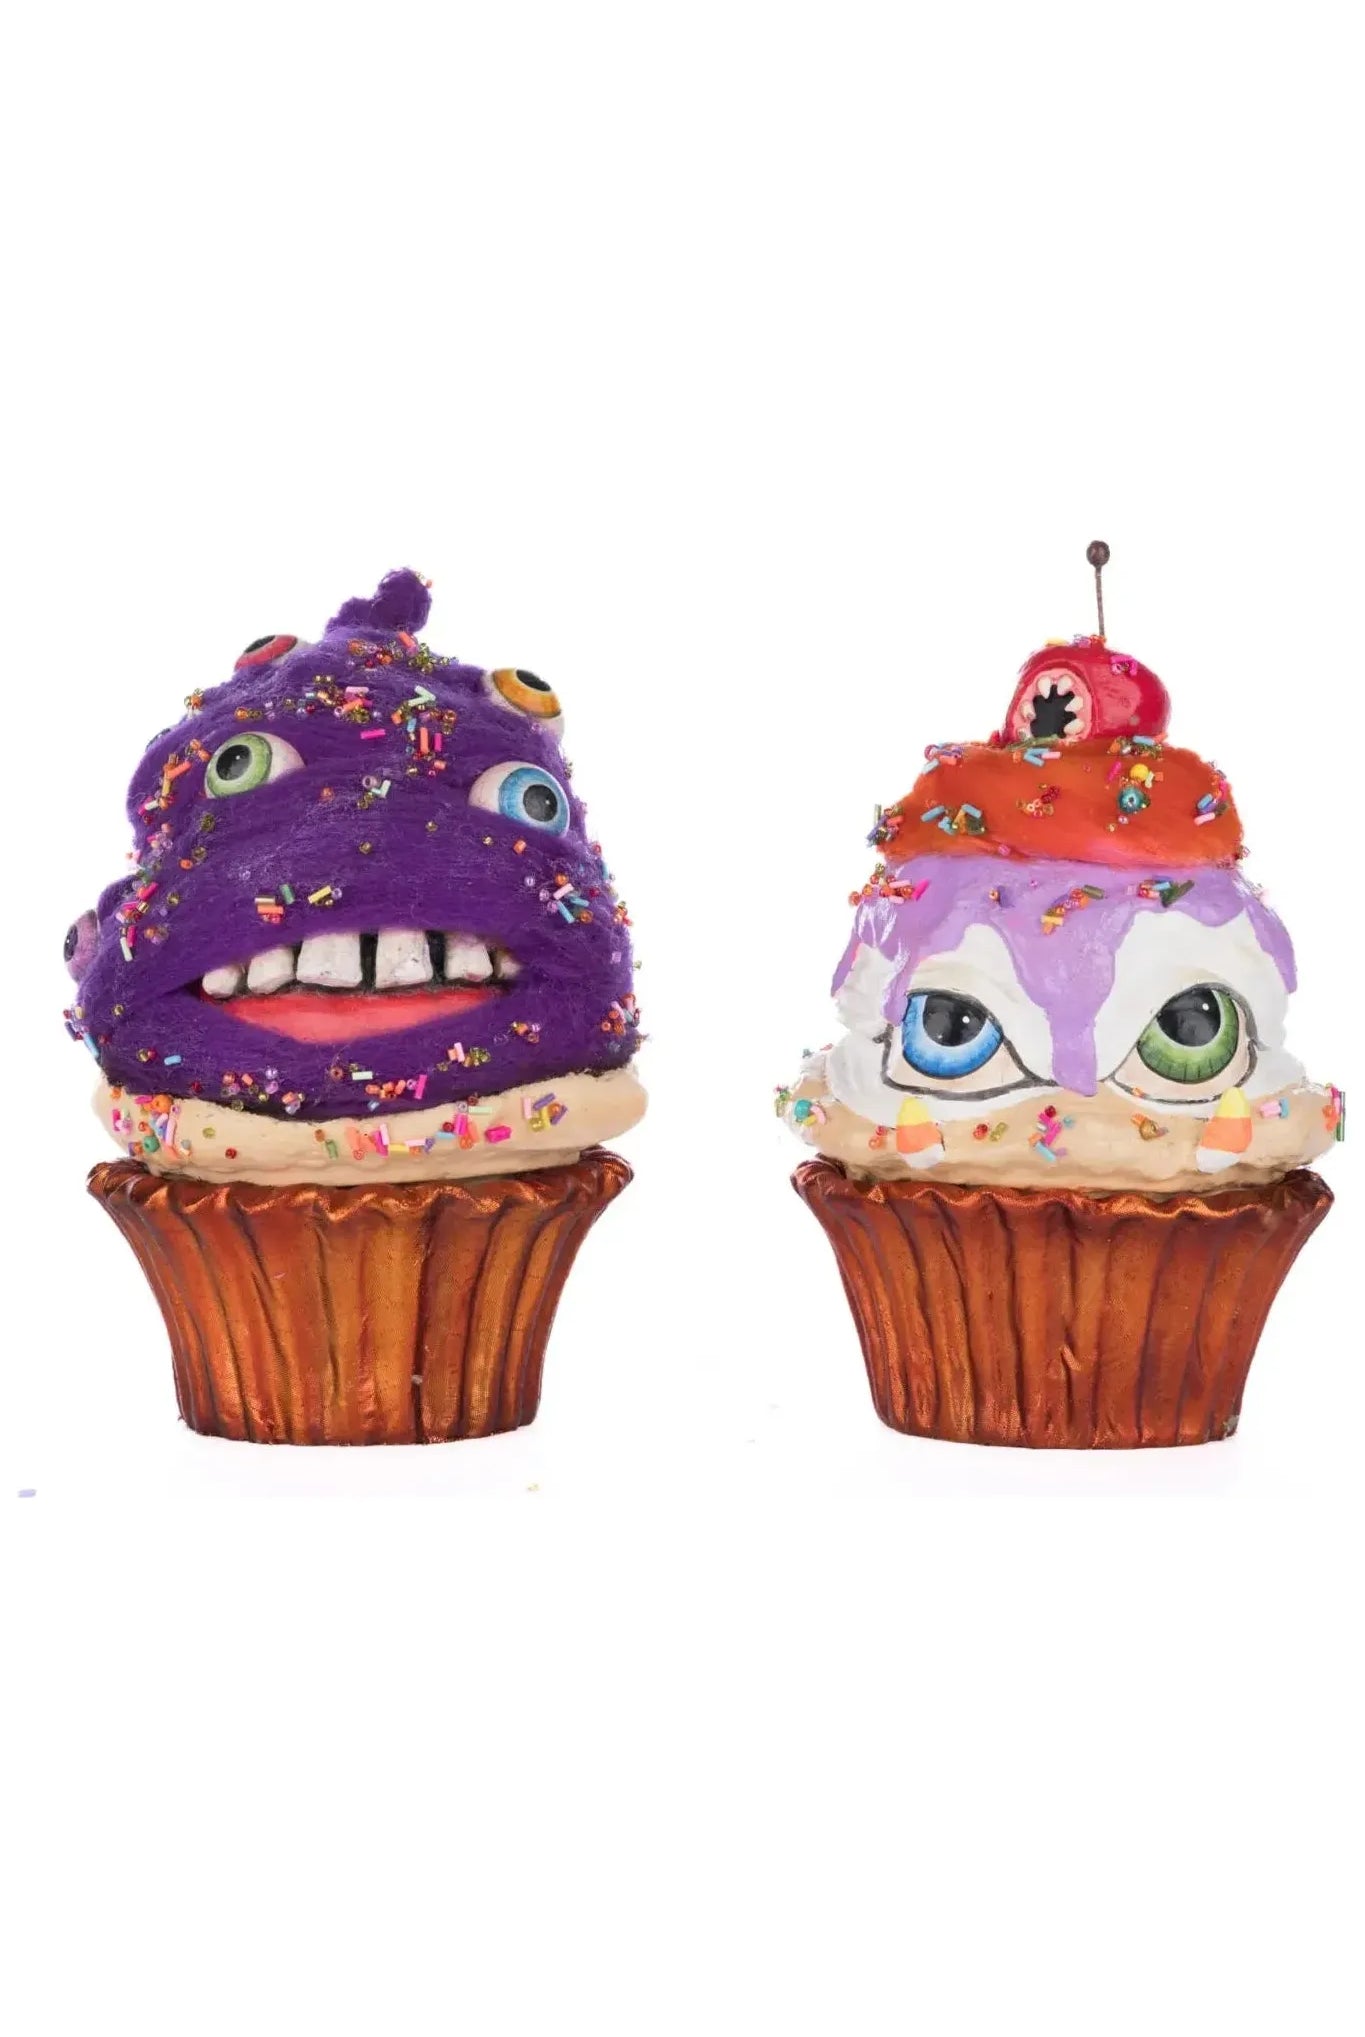 Shop For Creepy Cupcakes Crazy Eyes And Crabby Crumbs Assortment of 2 28-428534